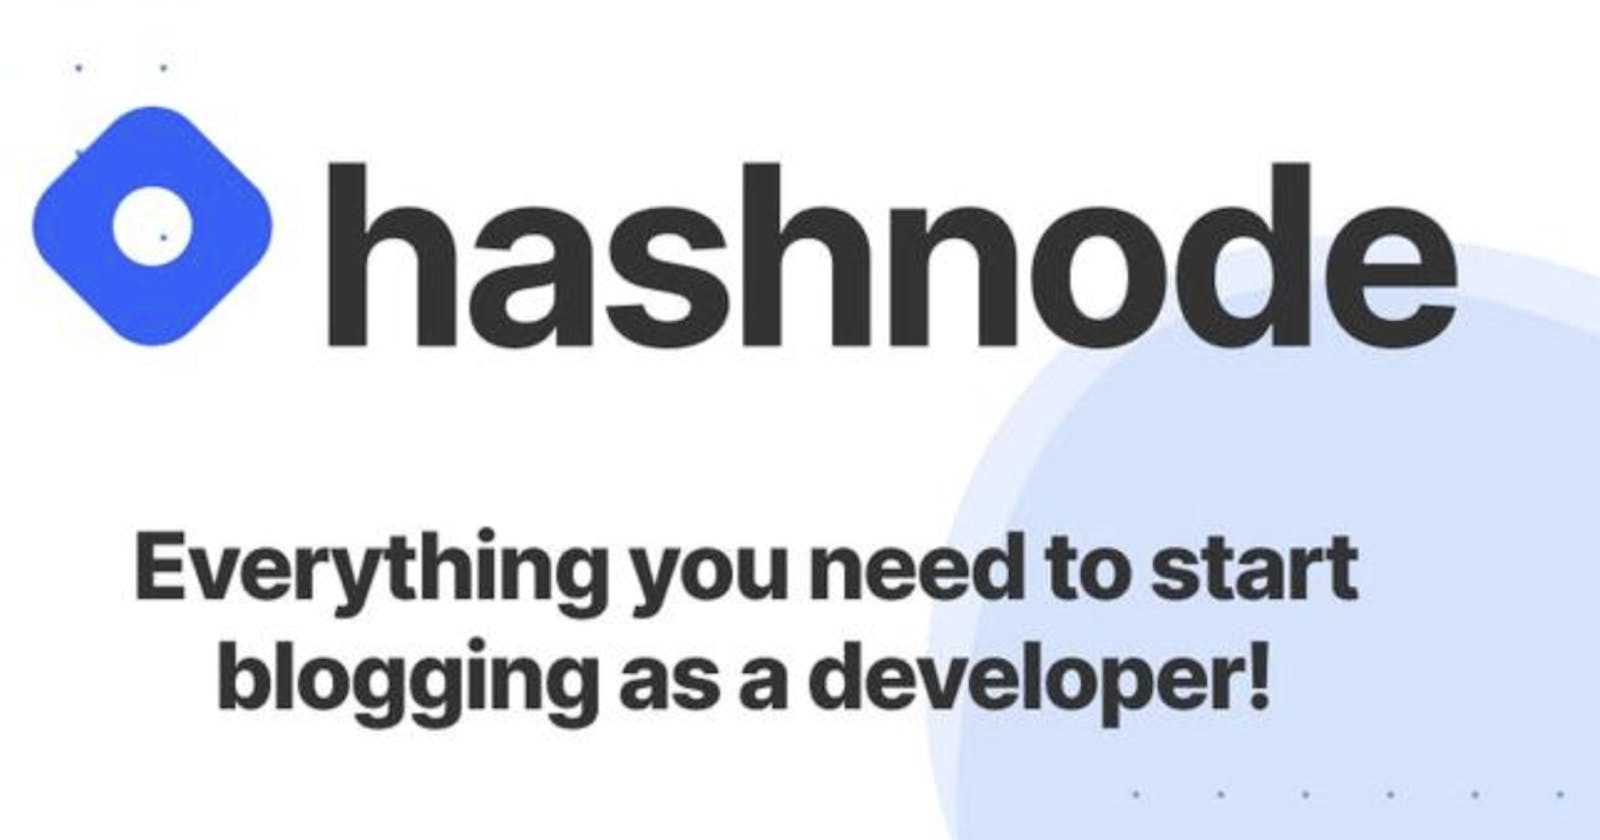 Why I moved my blog to Hashnode